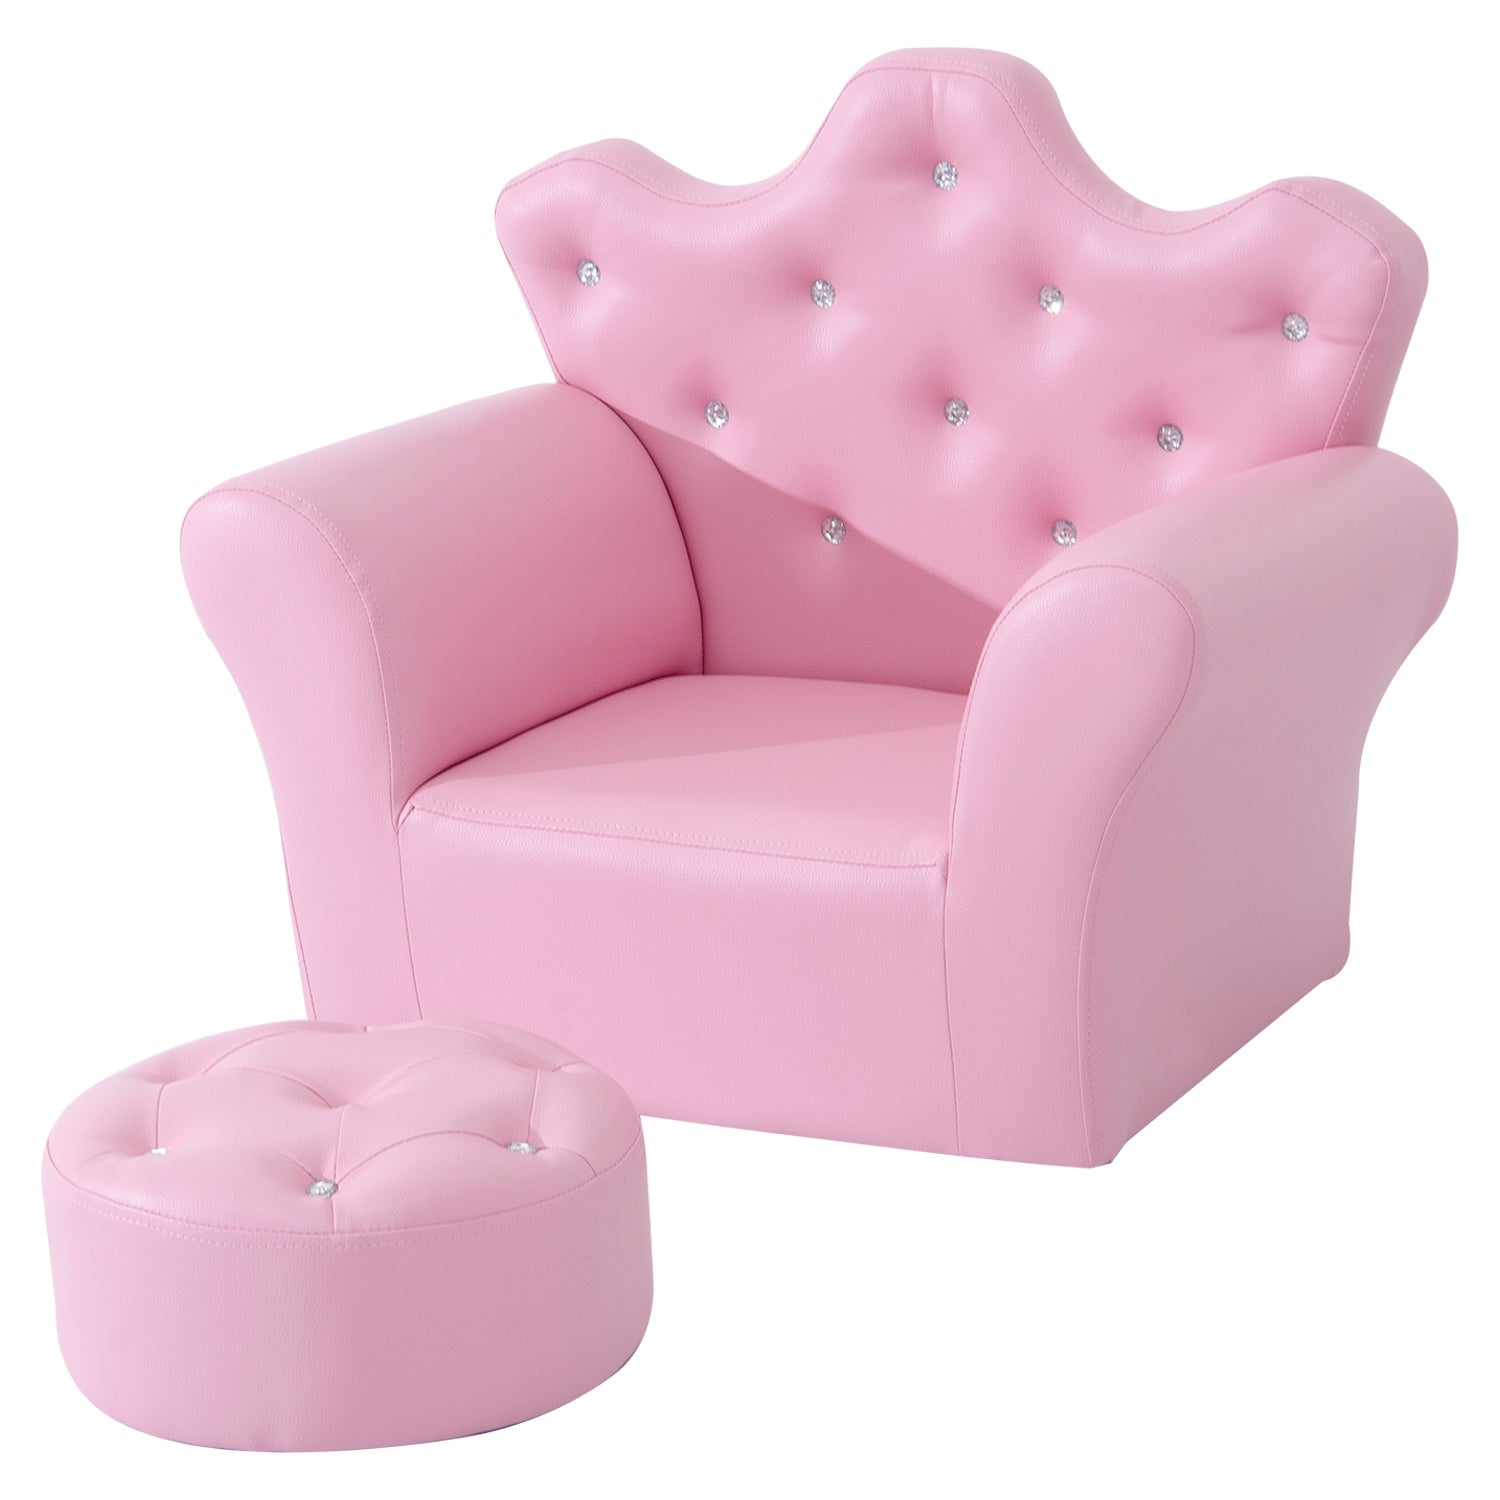 HOMCOM 2 PCS Kids Sofa and Ottoman Child Size Armchair for Girls Age 3 -5 Pink  | TJ Hughes